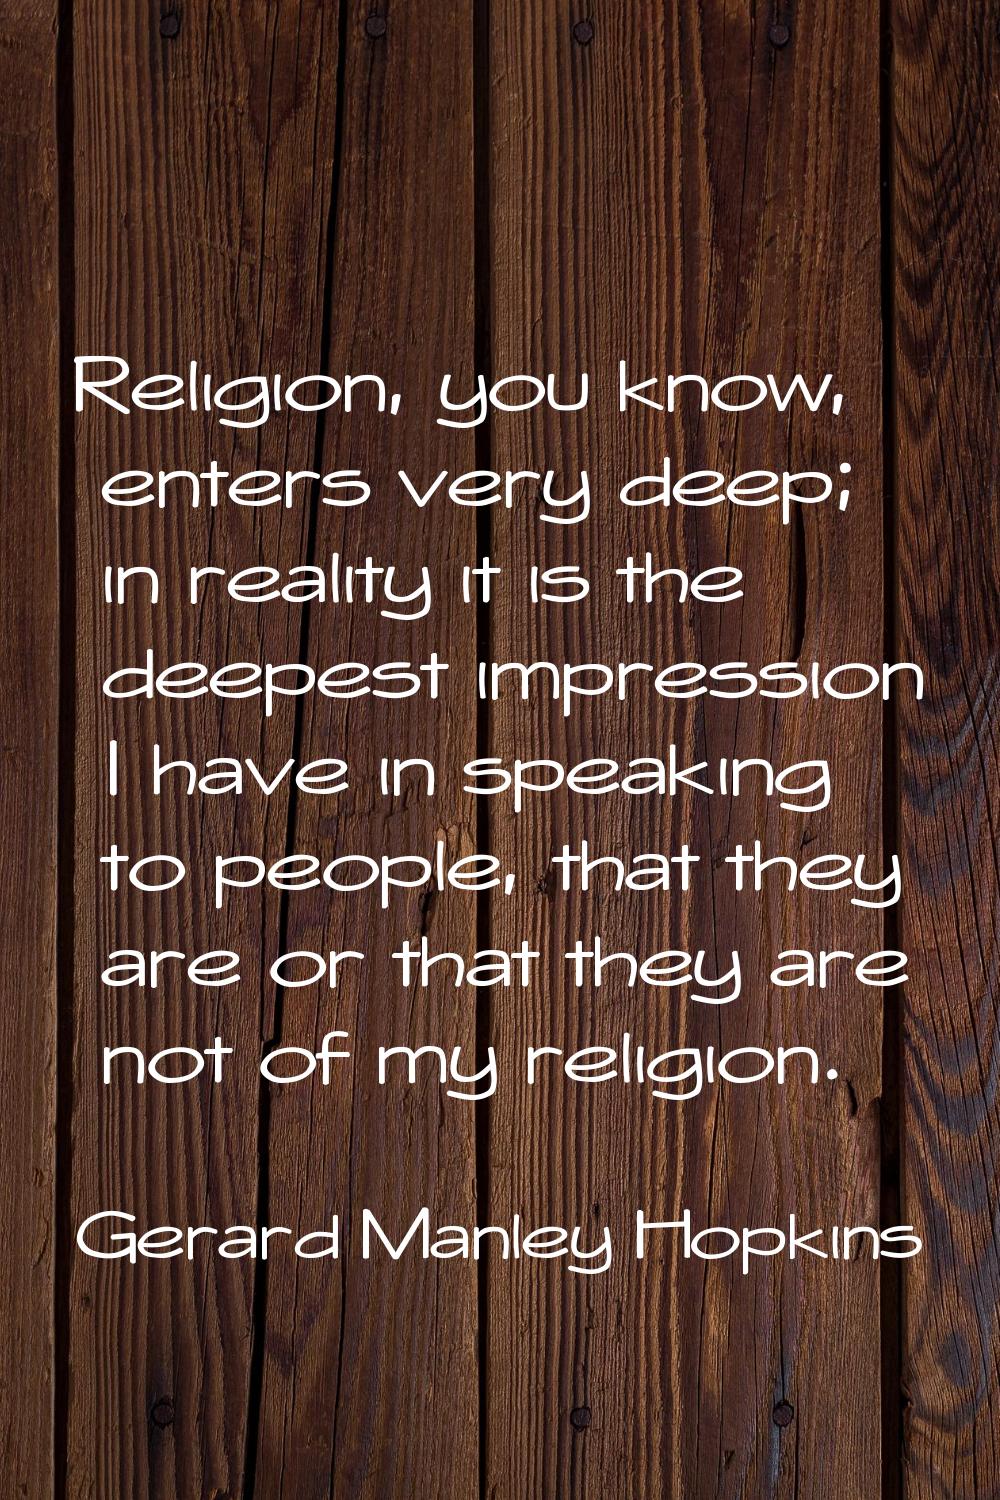 Religion, you know, enters very deep; in reality it is the deepest impression I have in speaking to